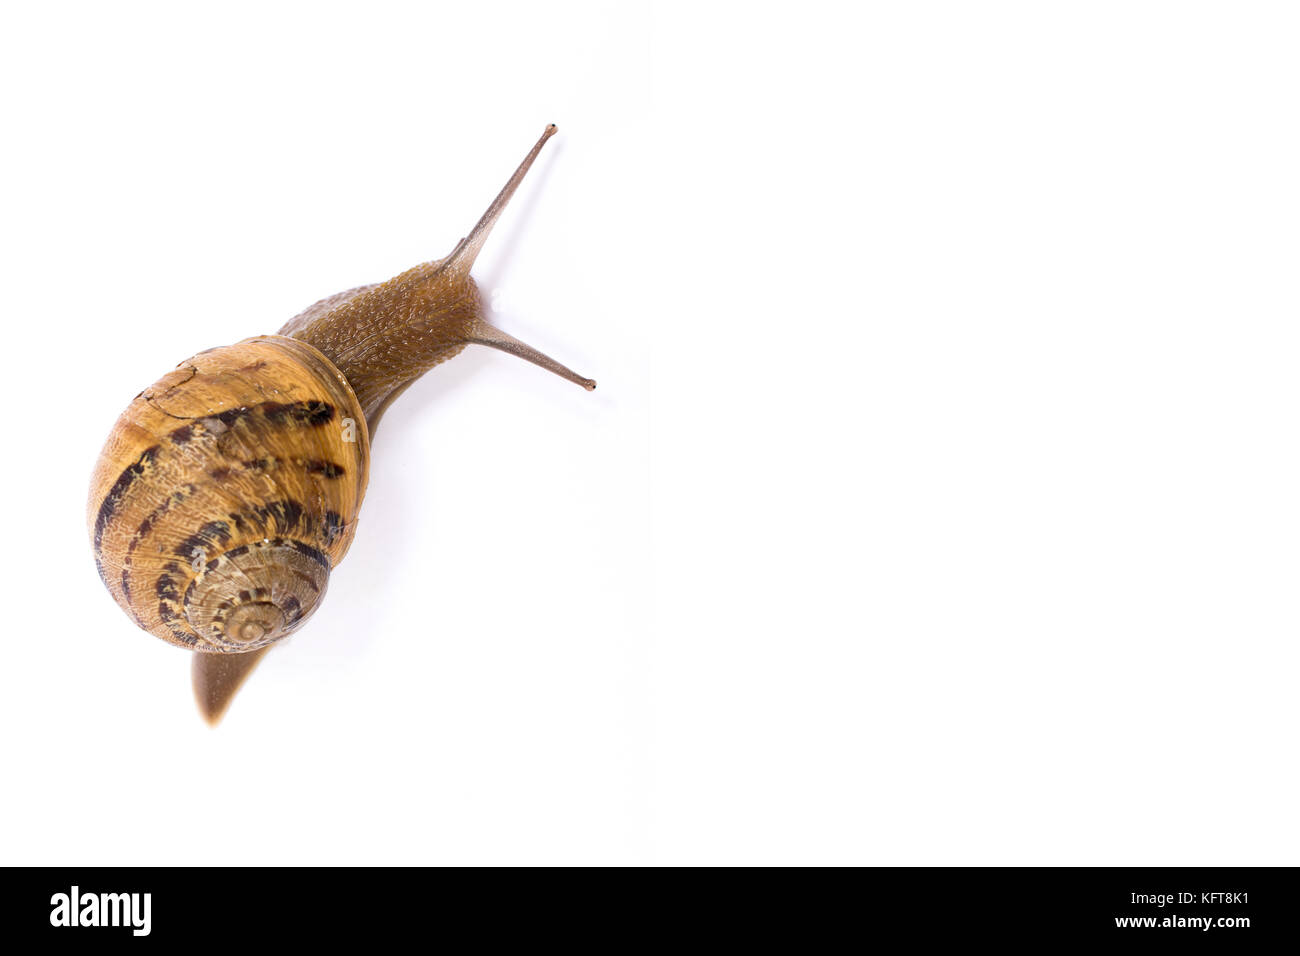 Snail isolated in white background with copy space Stock Photo